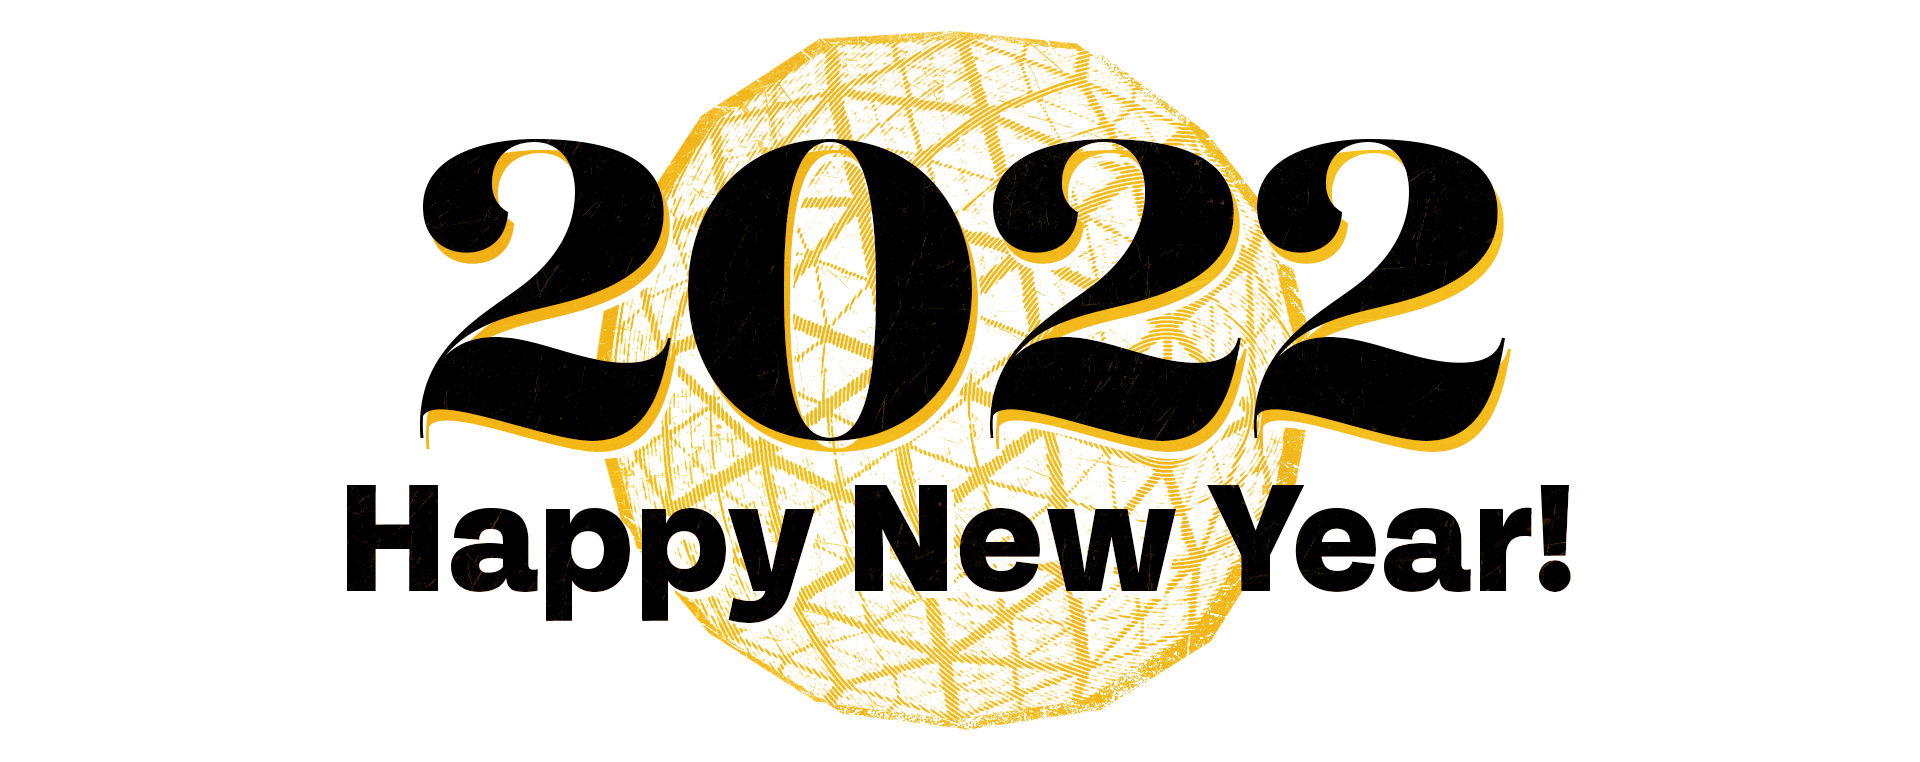 Golden and white New Year 2022 celebration graphic on a black background.